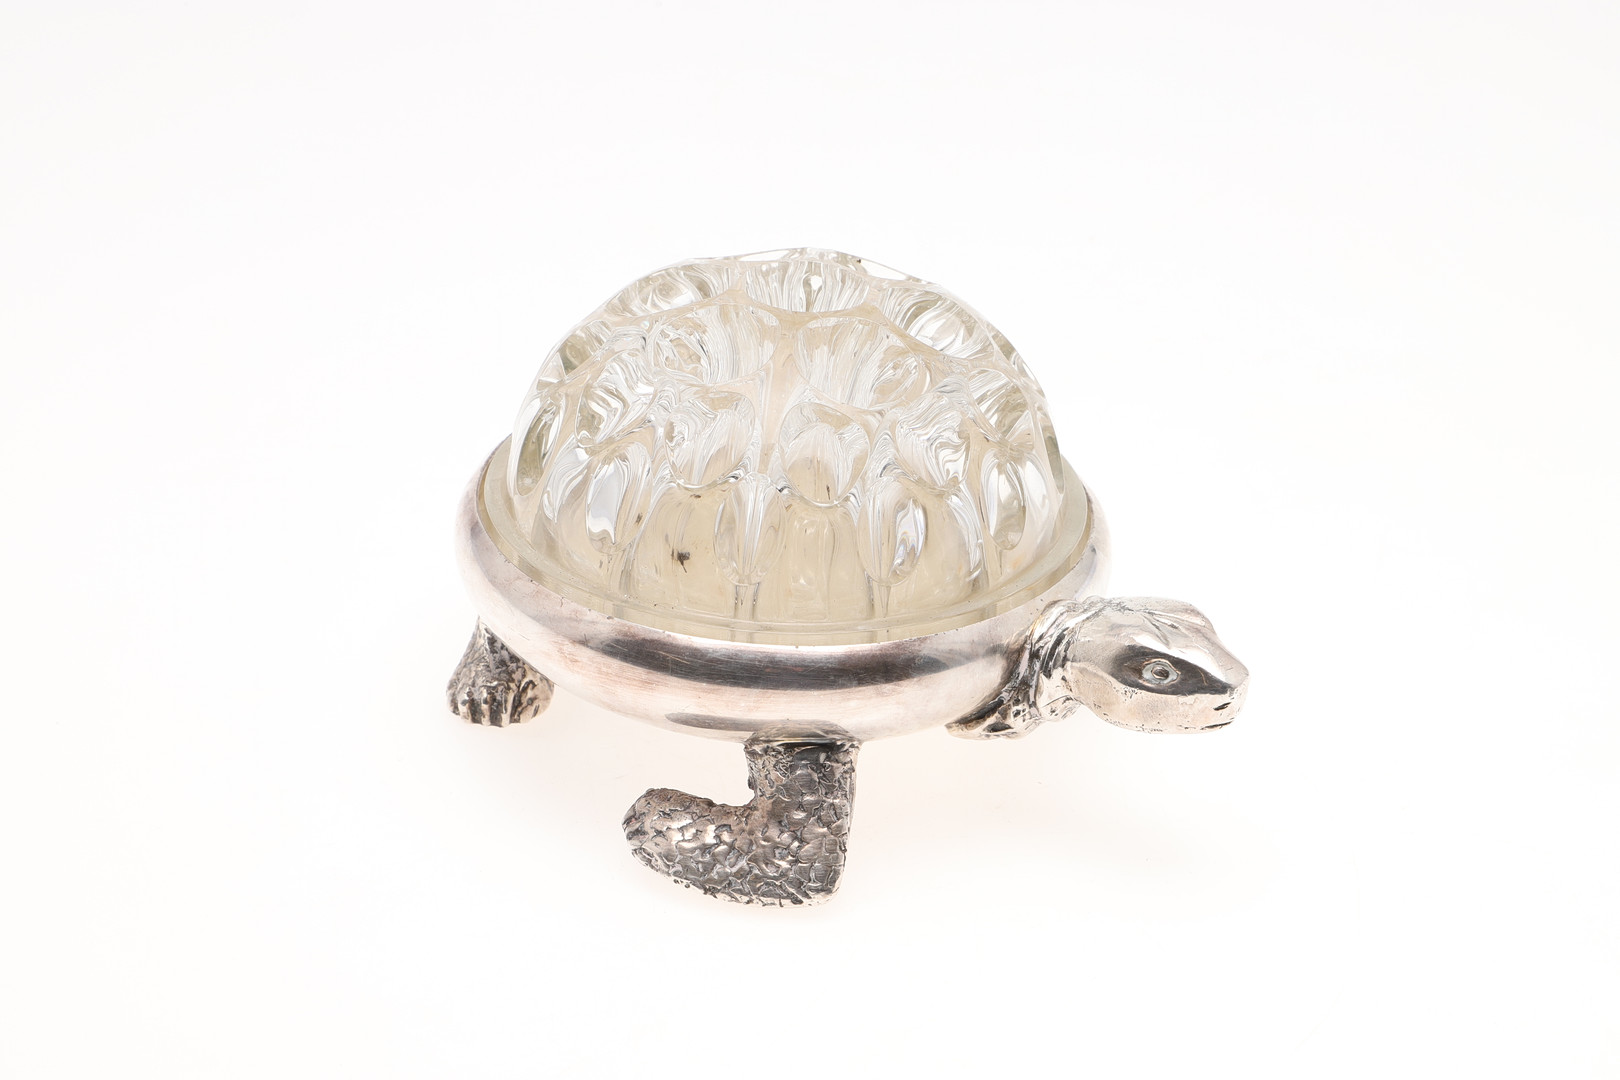 A LATE 19TH/ EARLY 20TH CENTURY CONTINENTAL GLASS MOUNTED SILVER TABLE DECORATION. - Image 2 of 6